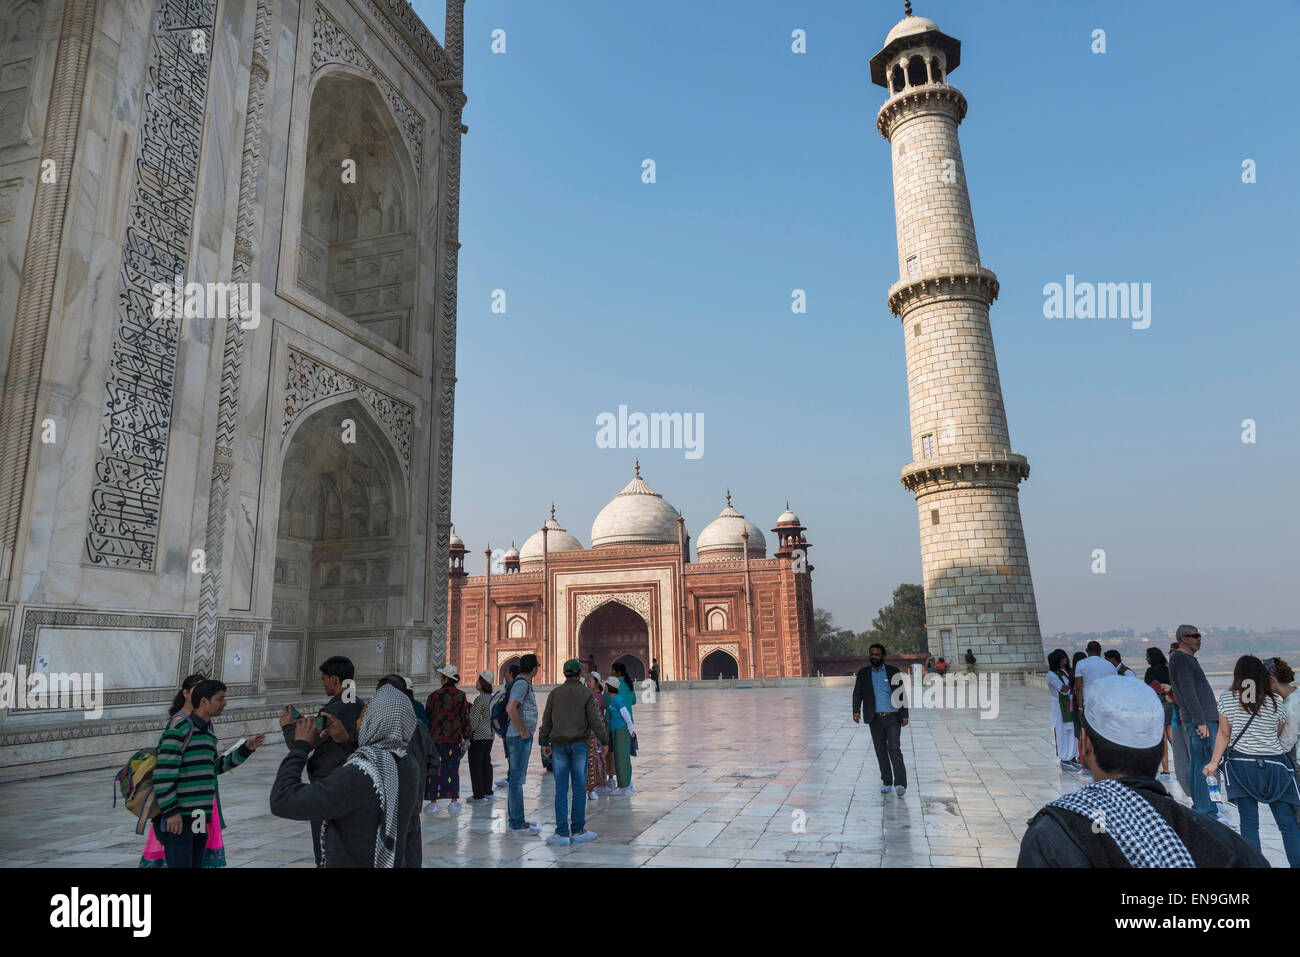 Tourists and sightseers visiting The Taj Mahal, Agra, India Stock Photo